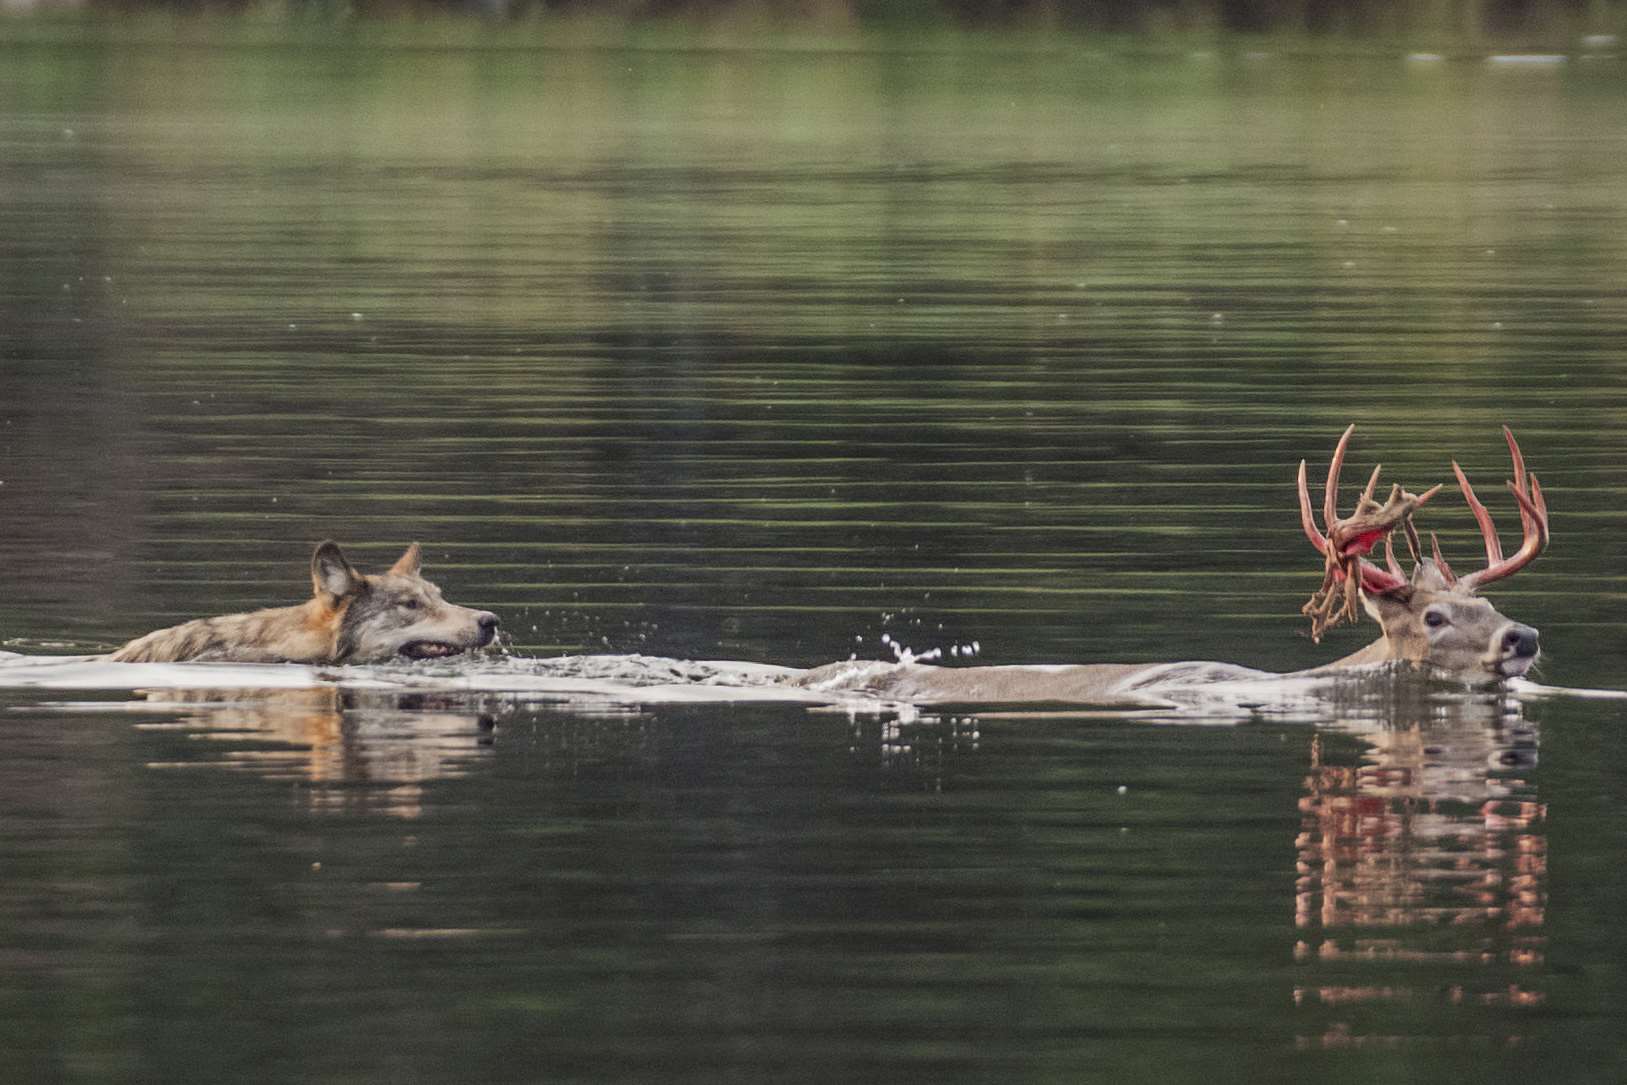 Snarling fox goes after deer. Credit: SWNS